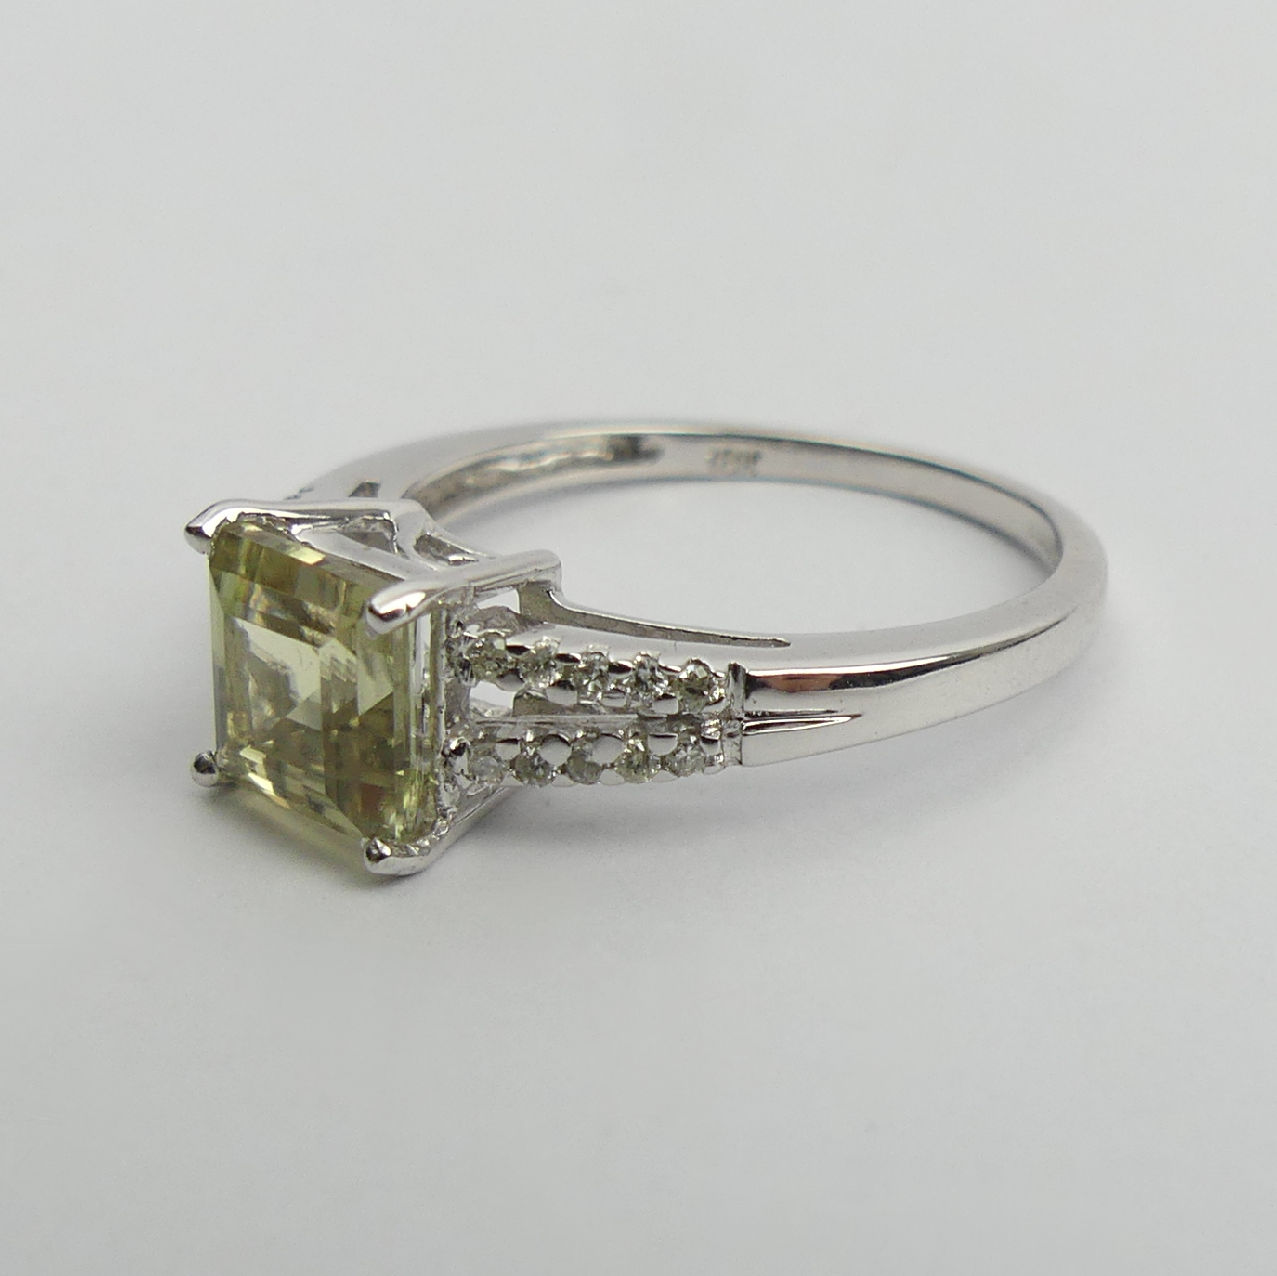 18ct white gold, square cut, zultanite and diamond ring, 2.8grams, 7.3mm, Size N1/2. UK Postage £12. - Image 3 of 6